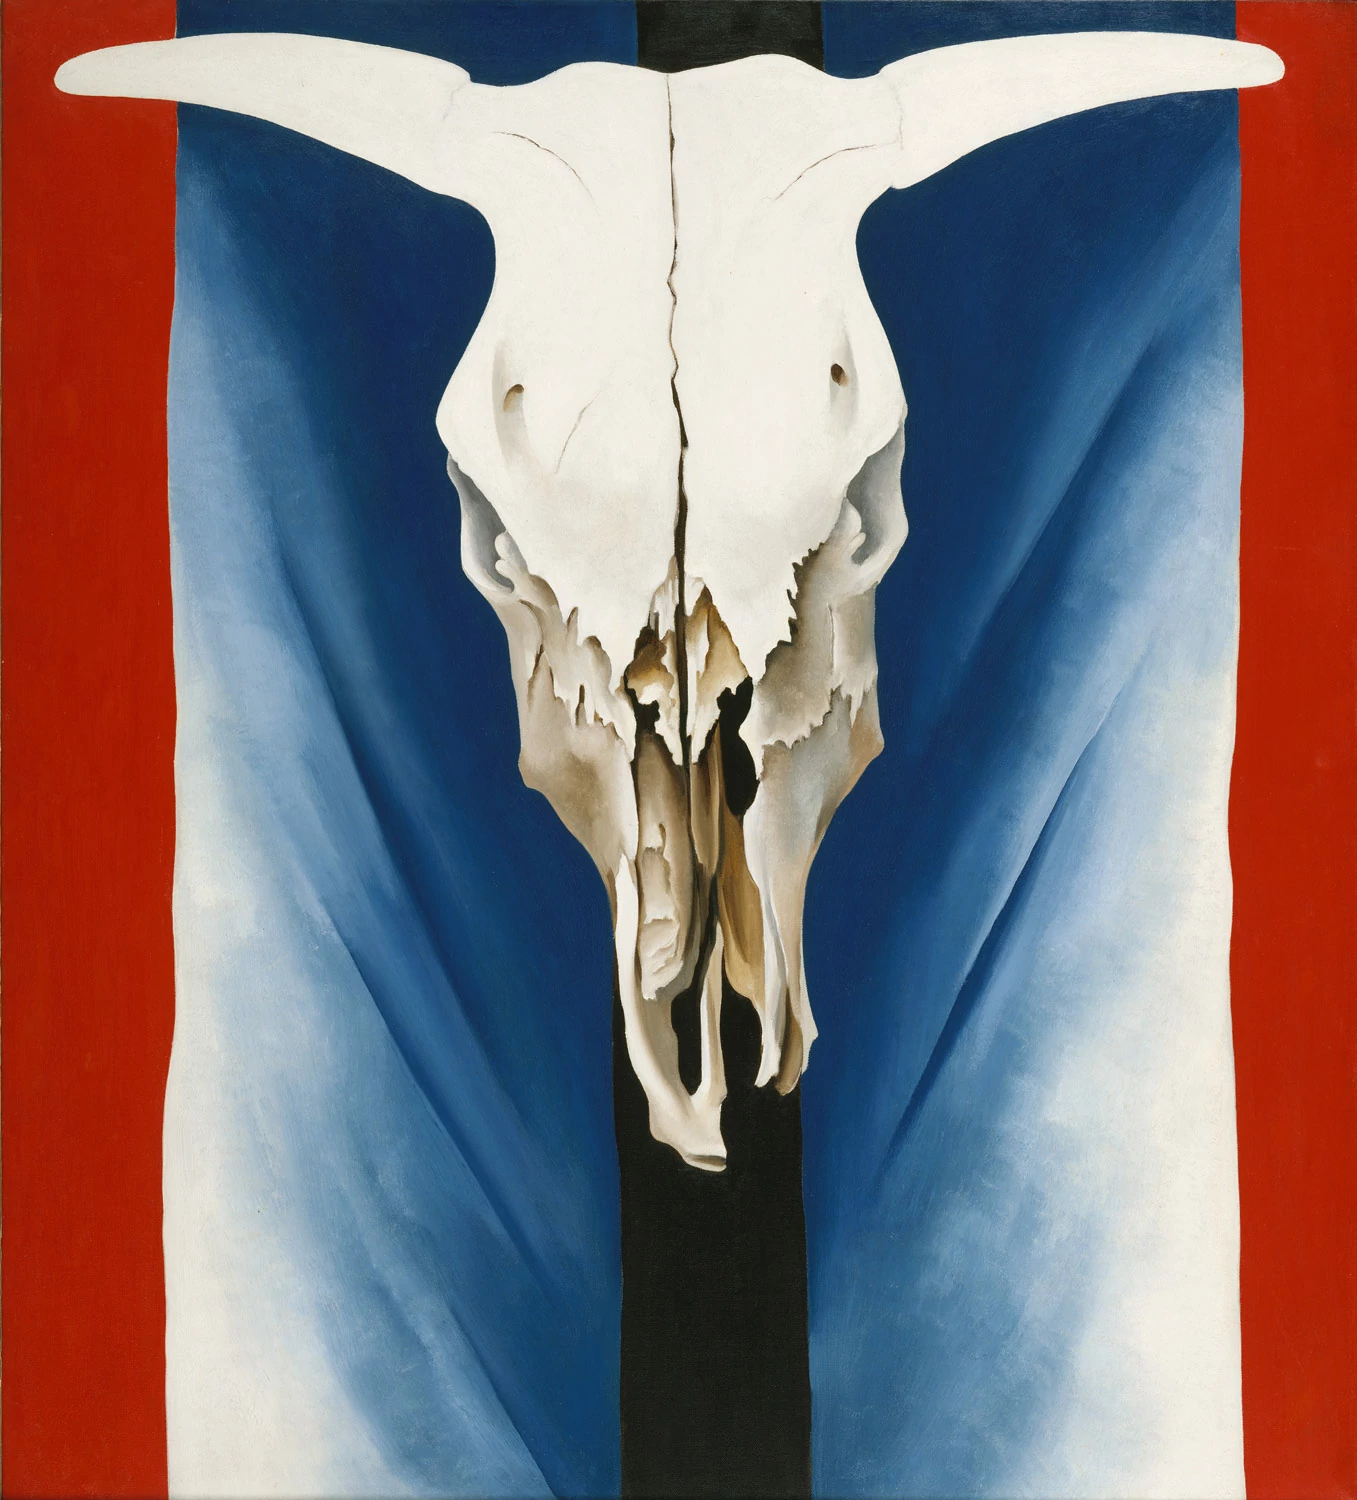 Cow's Skull: Red, White, and Blue, Georgia O'Keeffe